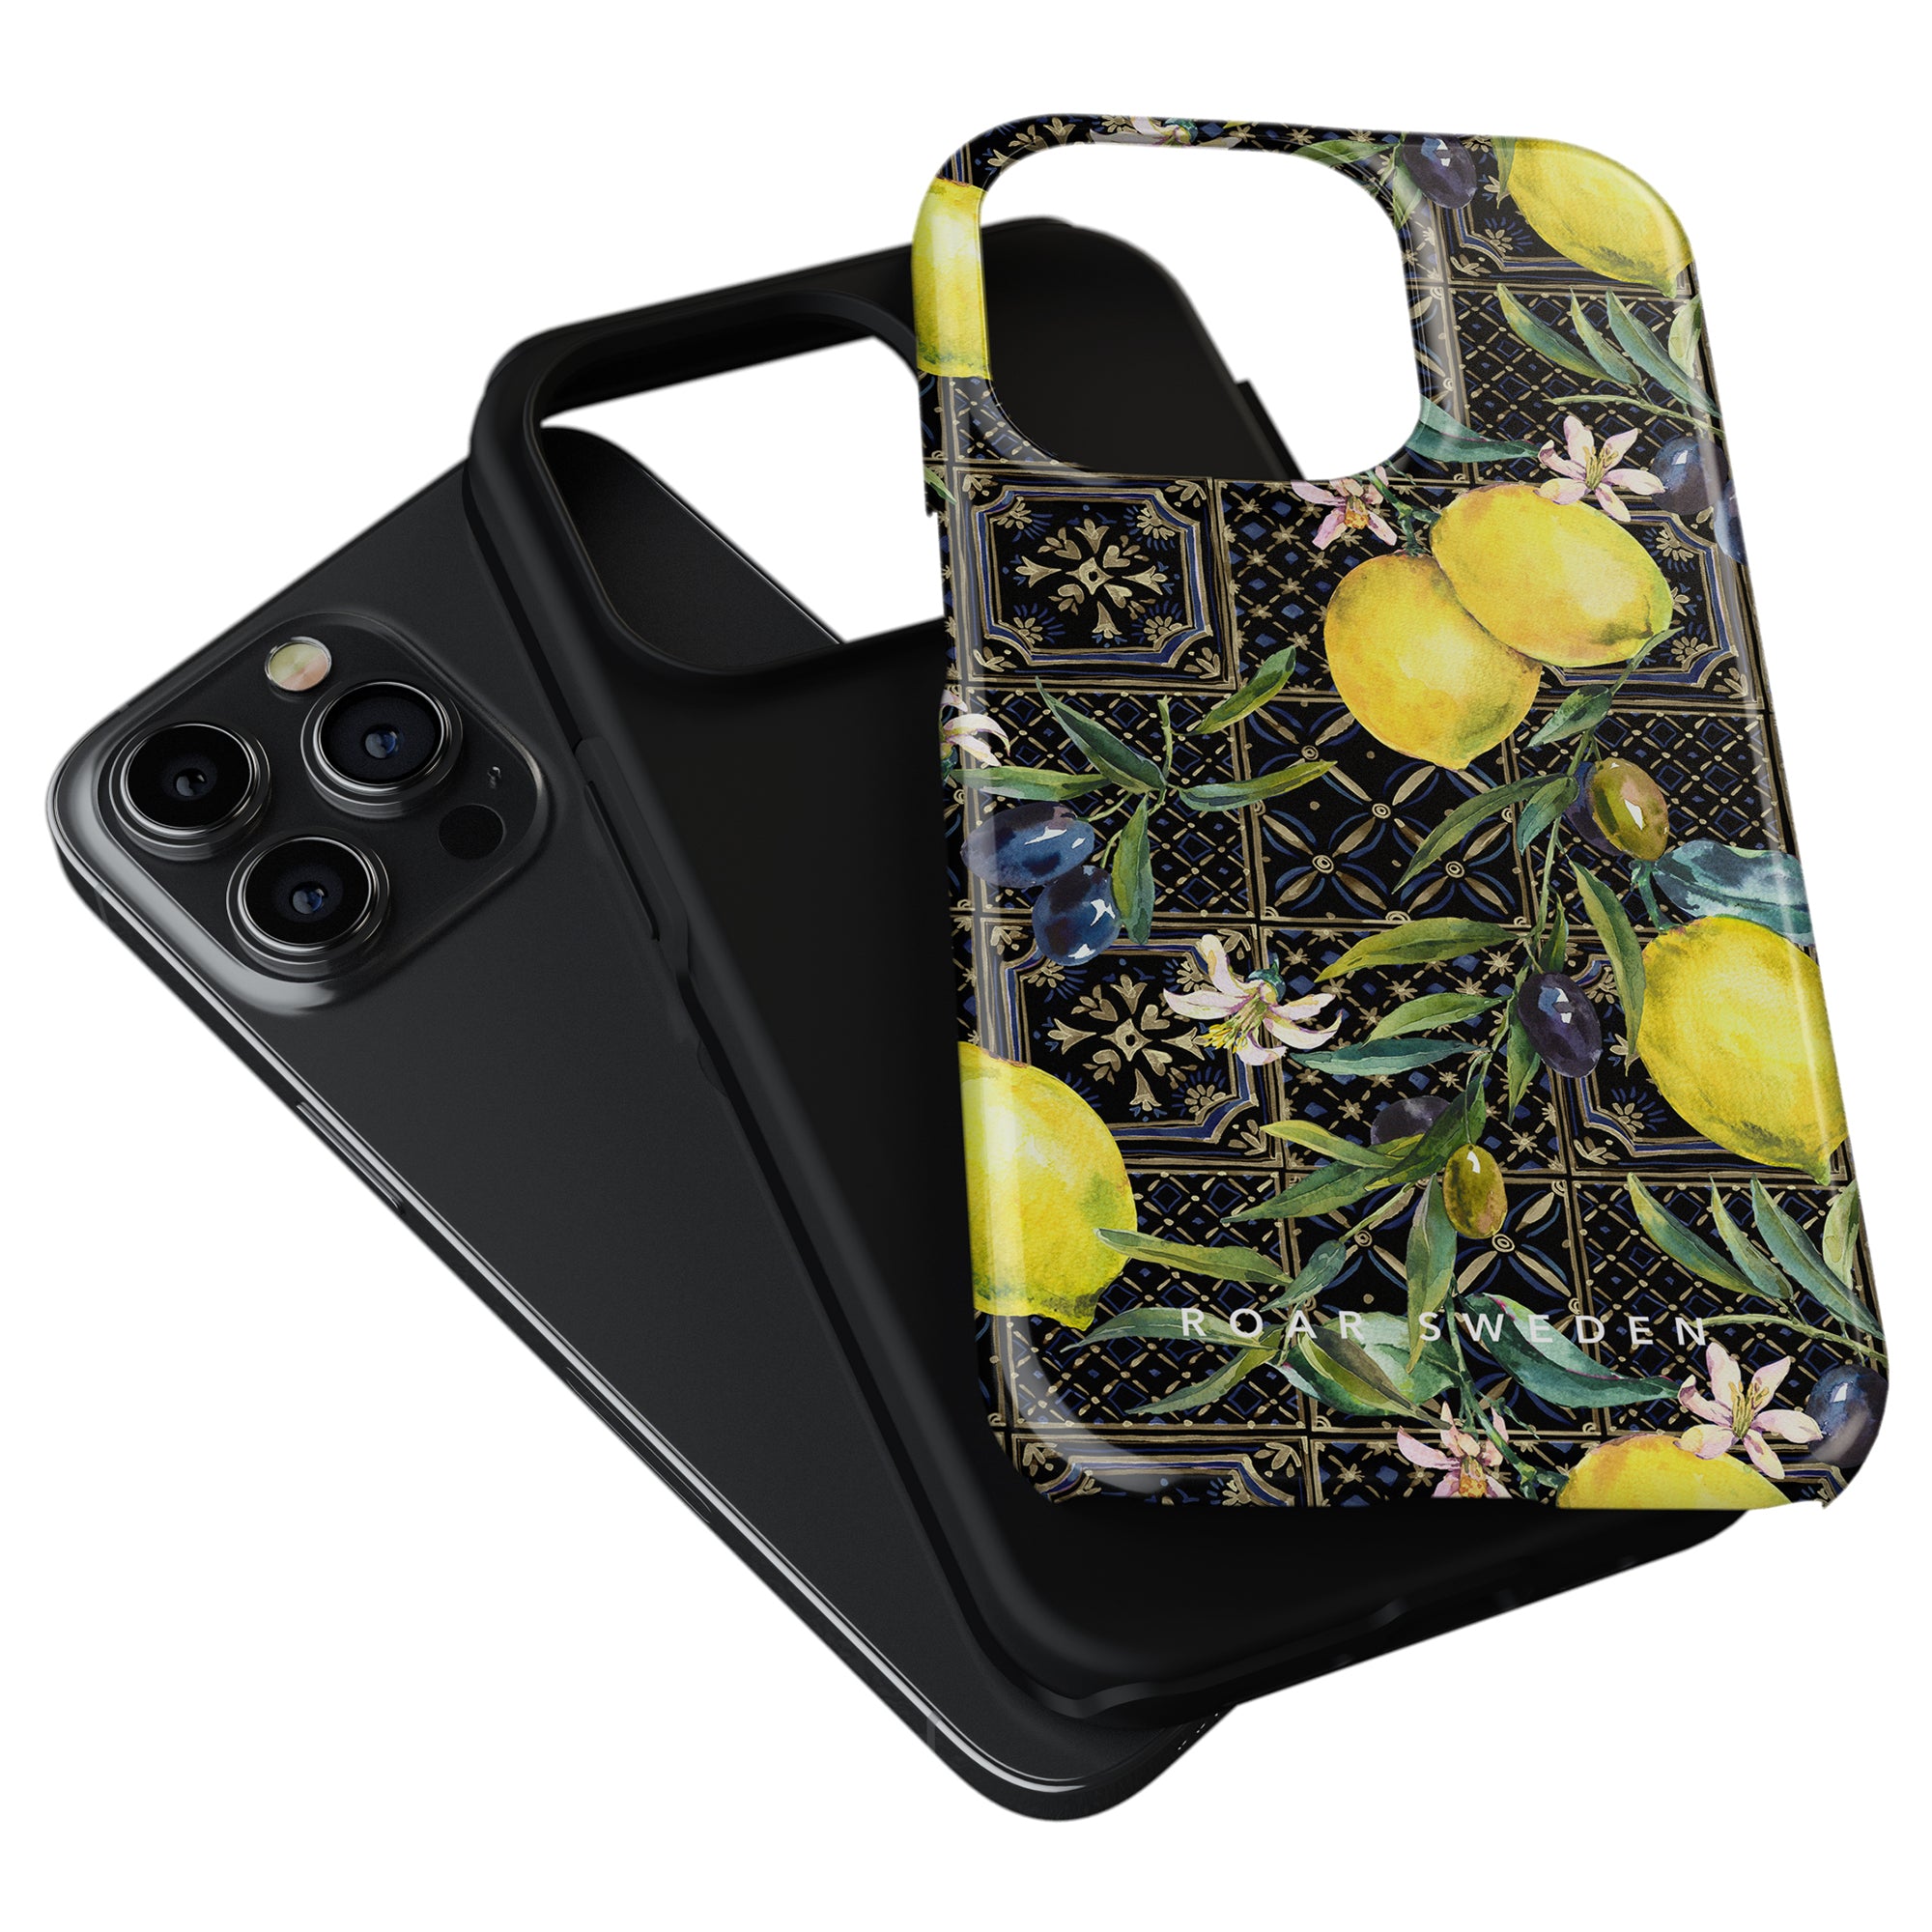 Black smartphone with a triple-lens camera next to a Sorrento - Tough Case decorated with a lemon and floral pattern.